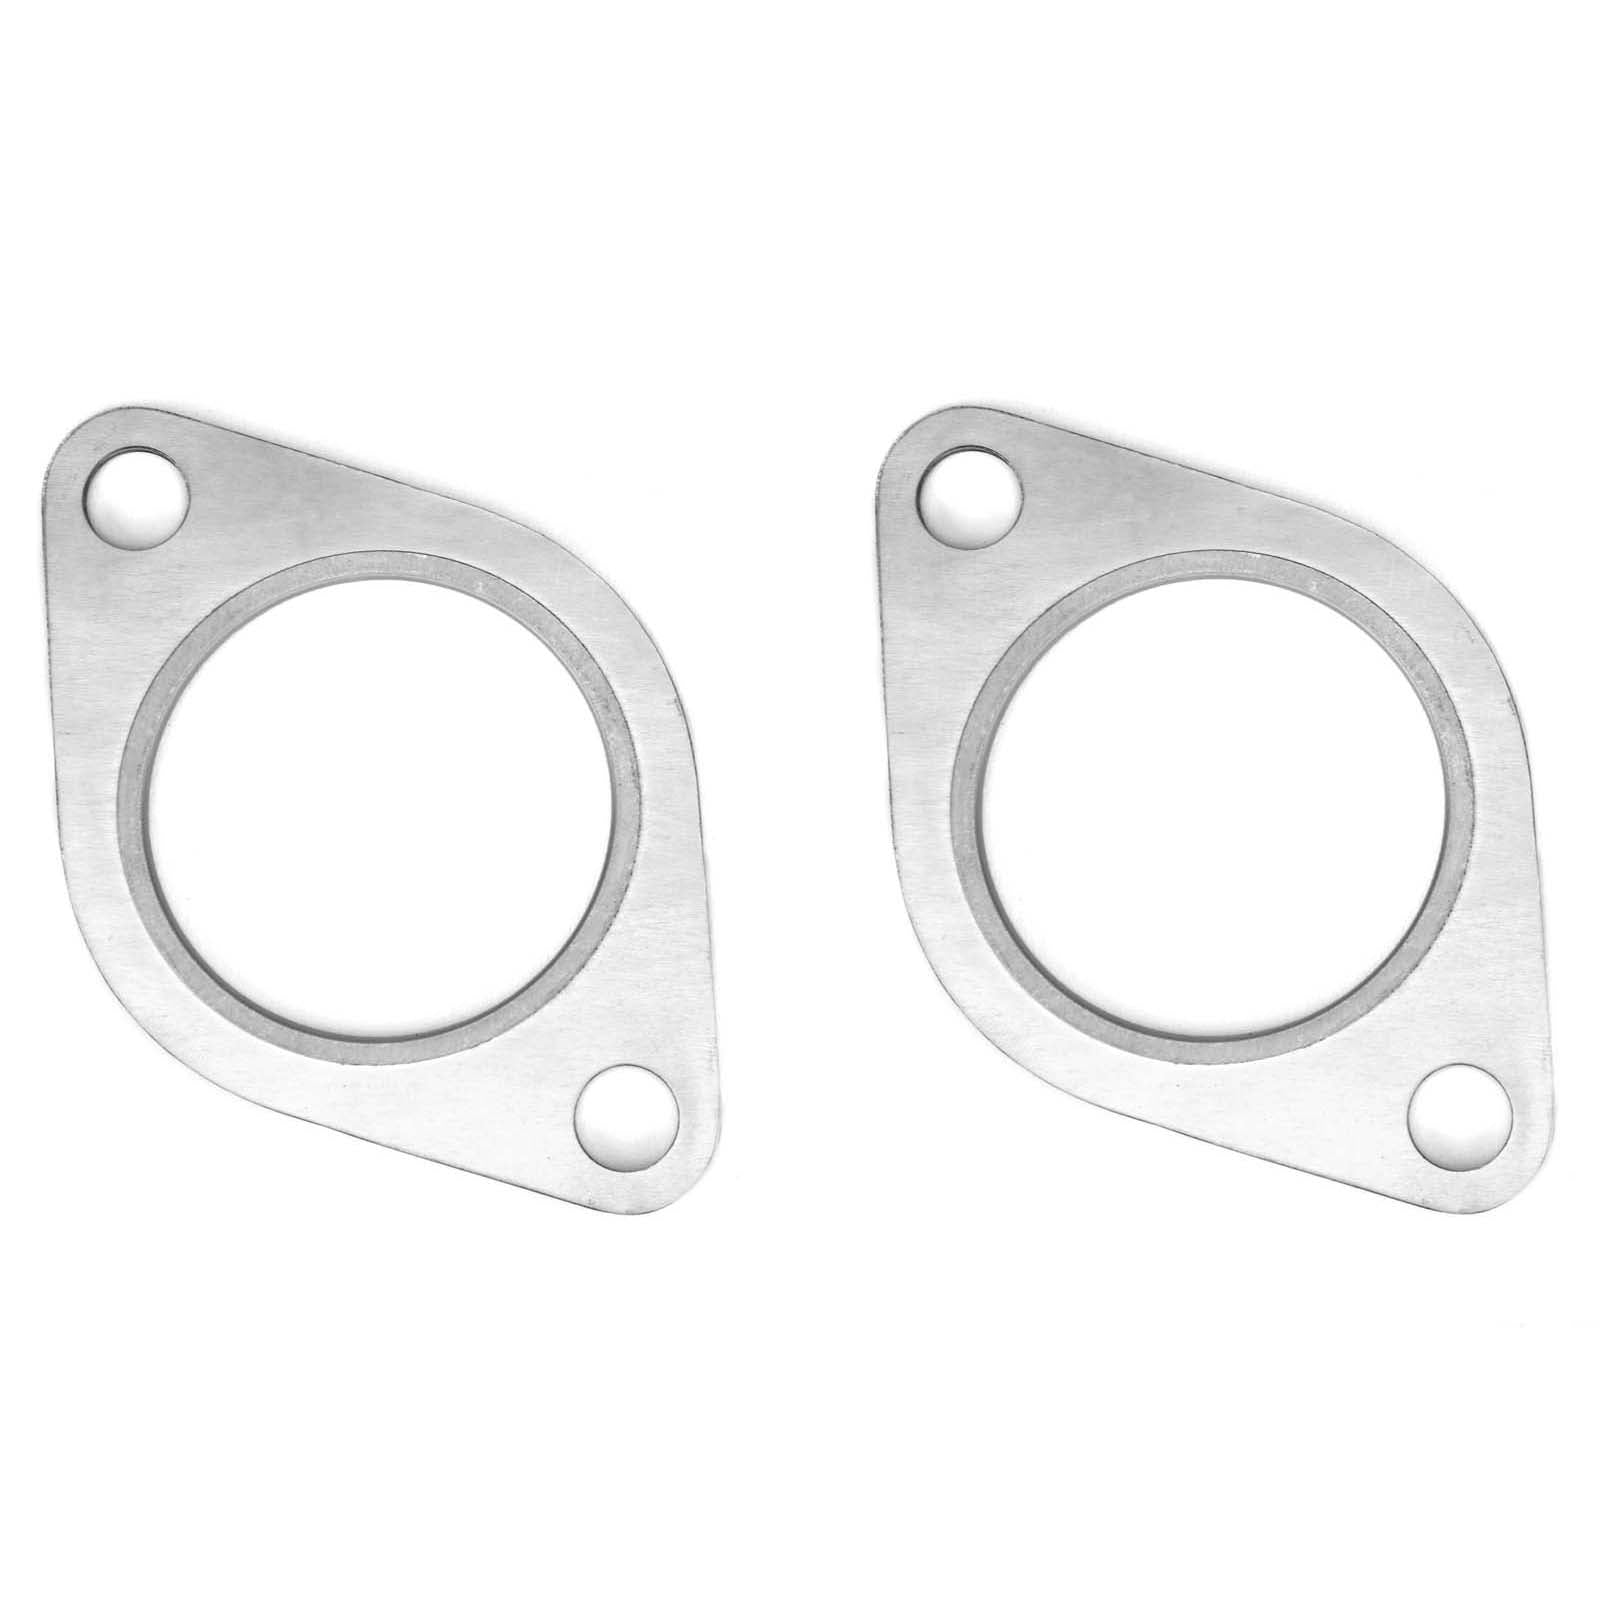 GrimmSpeed Exhaust Manifold to Crosspipe Gasket(pair) 2X THICK - Subaru